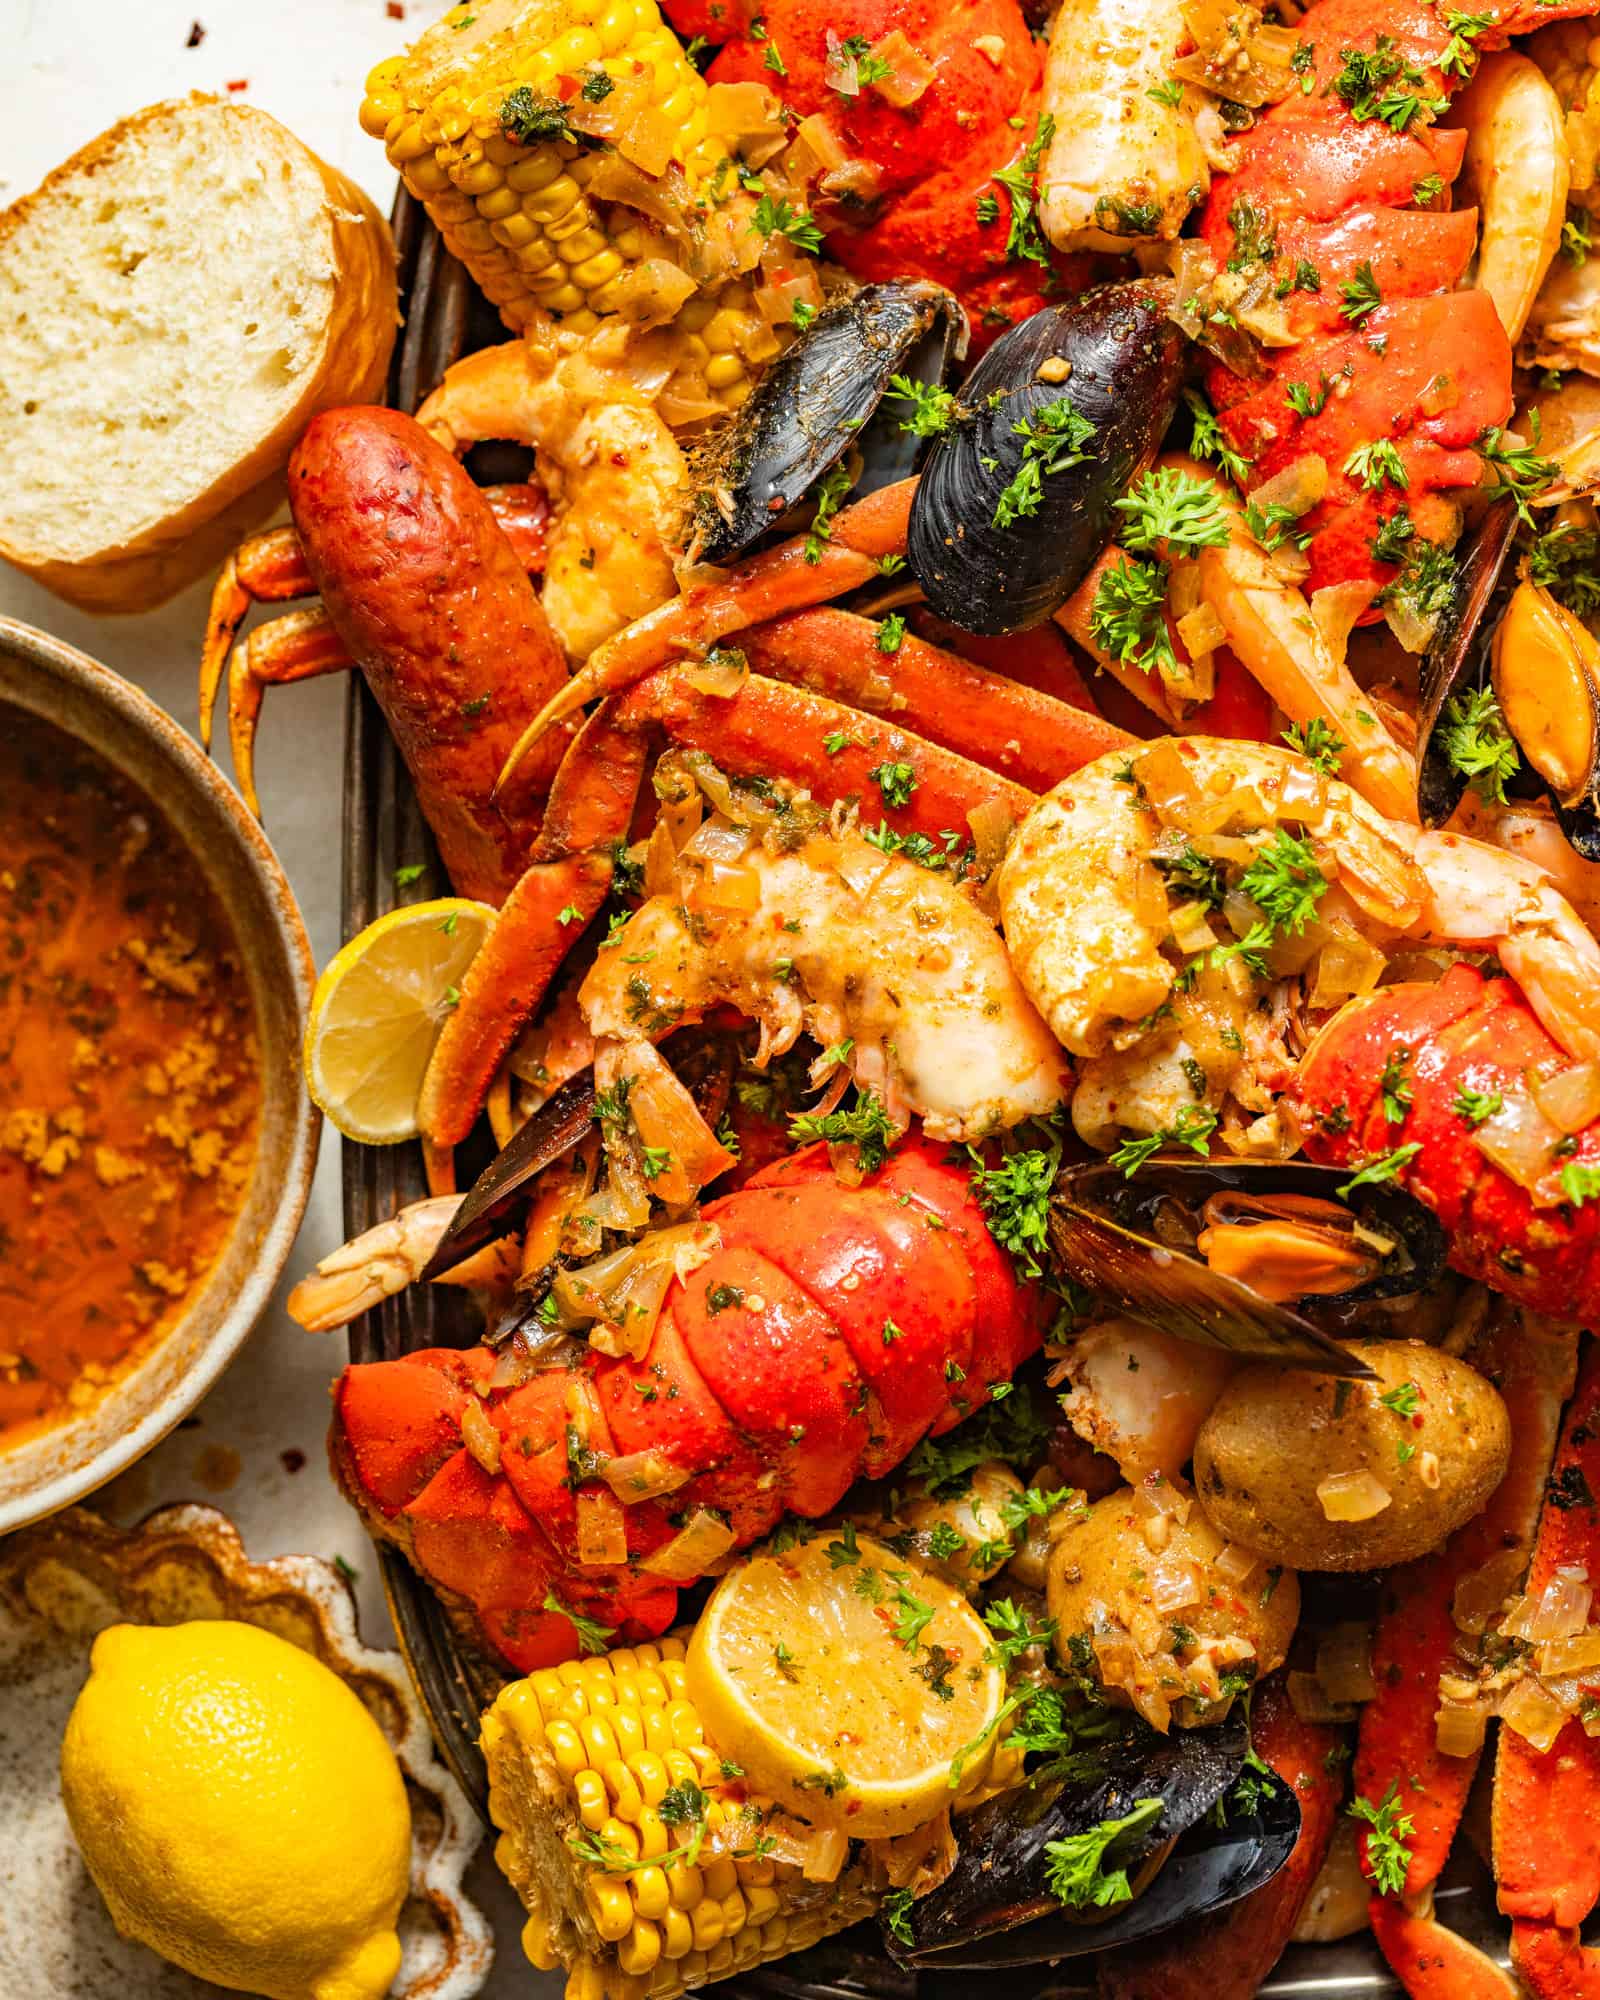 cajun seafood boil recipe on a large serving tray next to a bowl of seafood boil sauce, bread, and sliced lemons